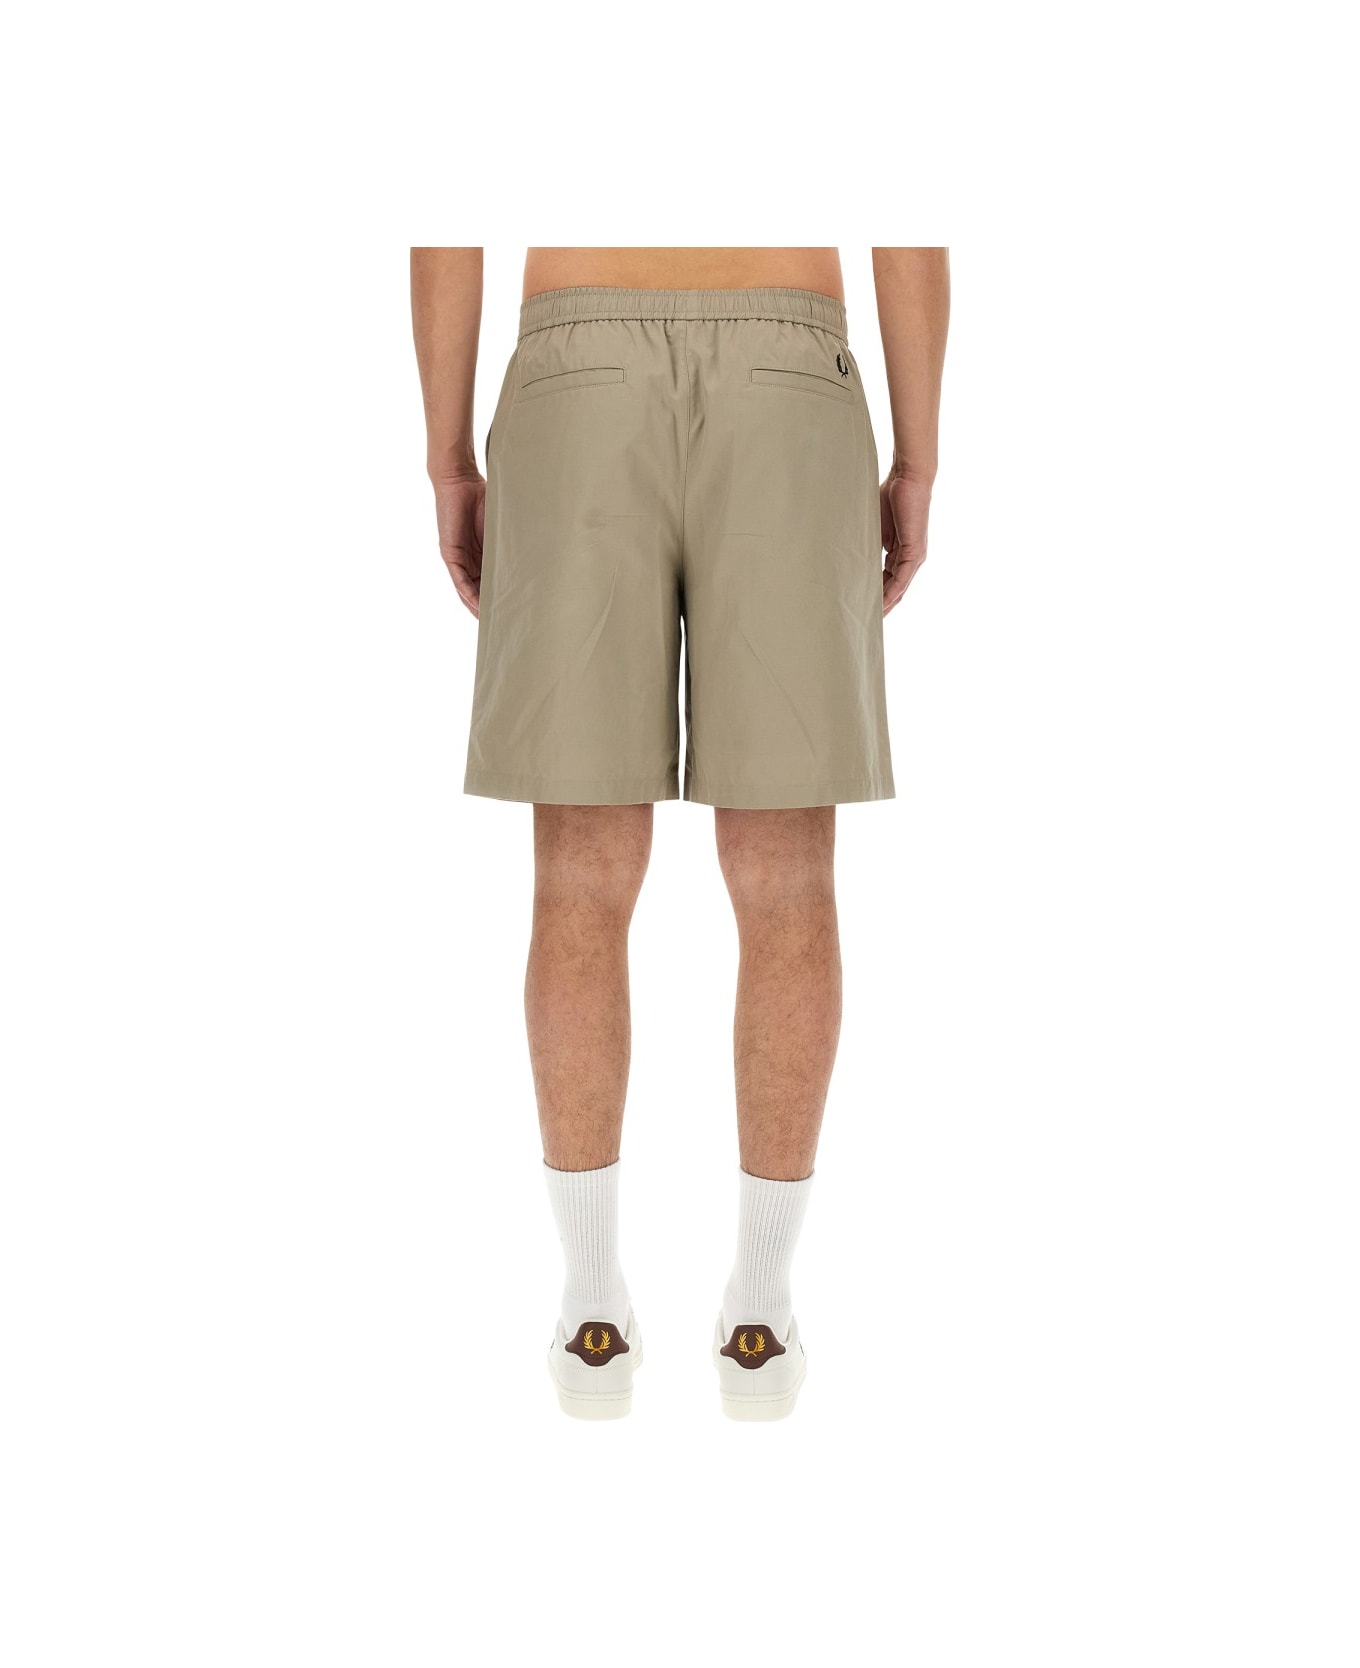 Fred Perry Cotton Bermuda Shorts - BEIGE